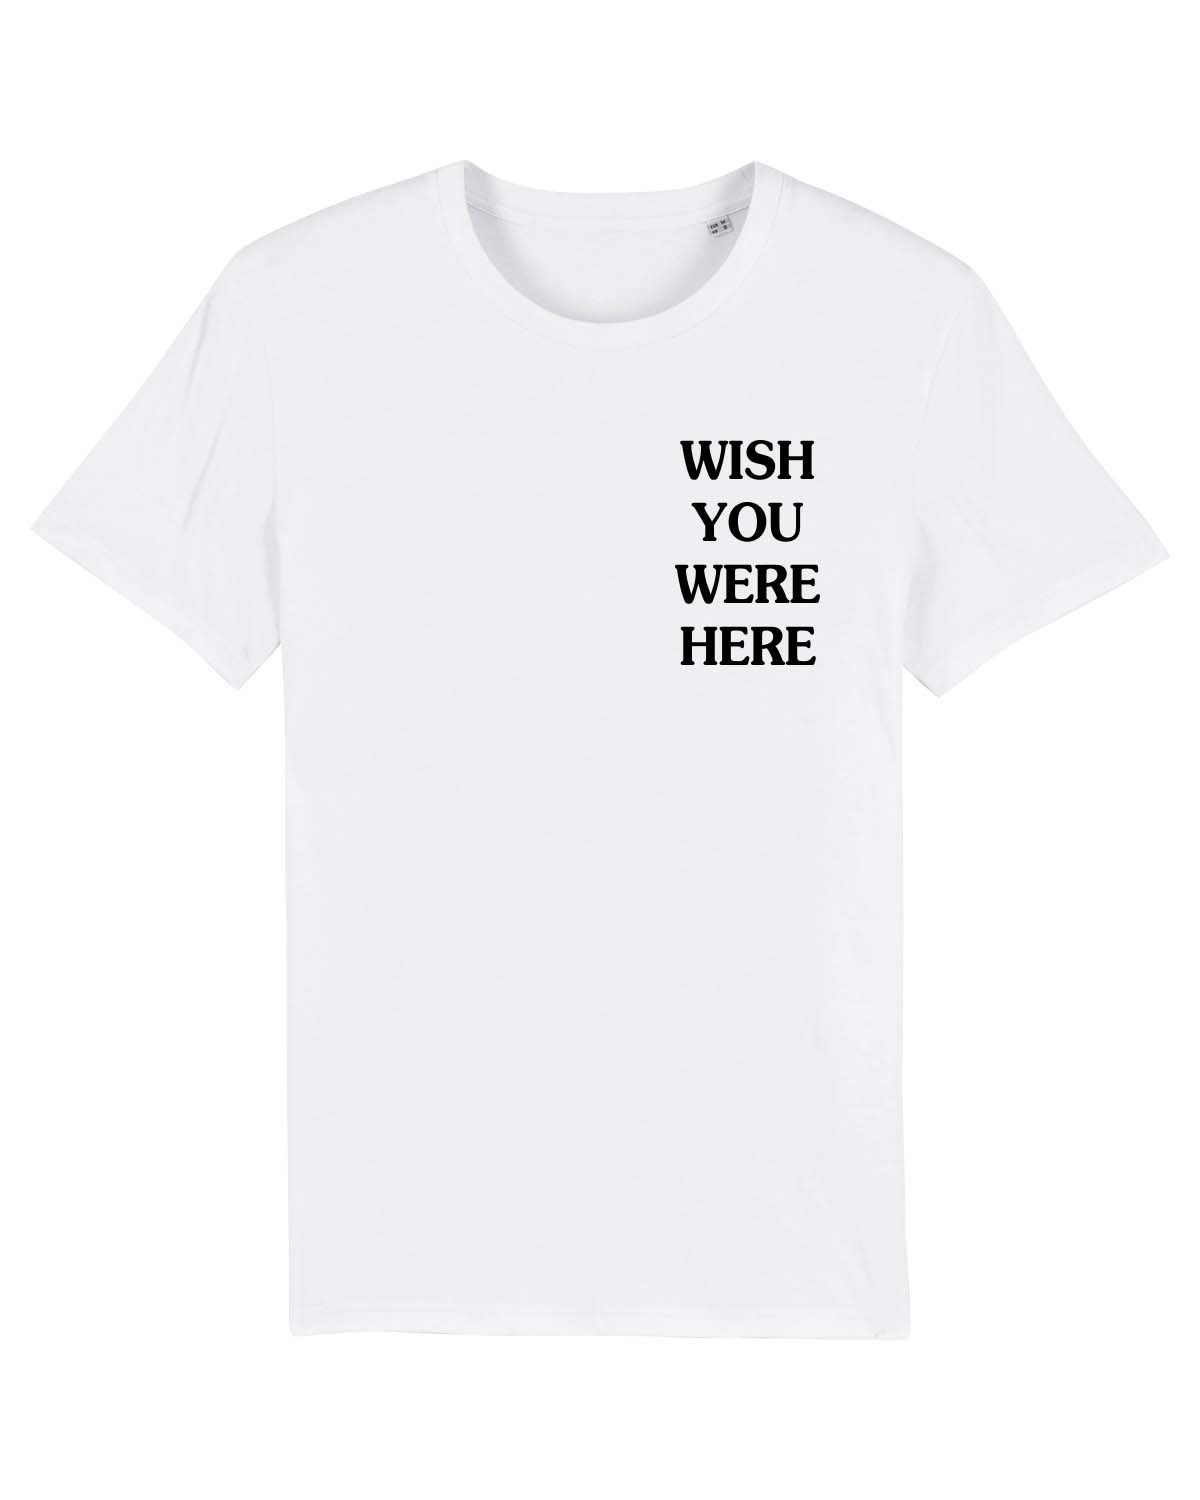 T shirt Astroworld Madison Square Garden Wish you were here